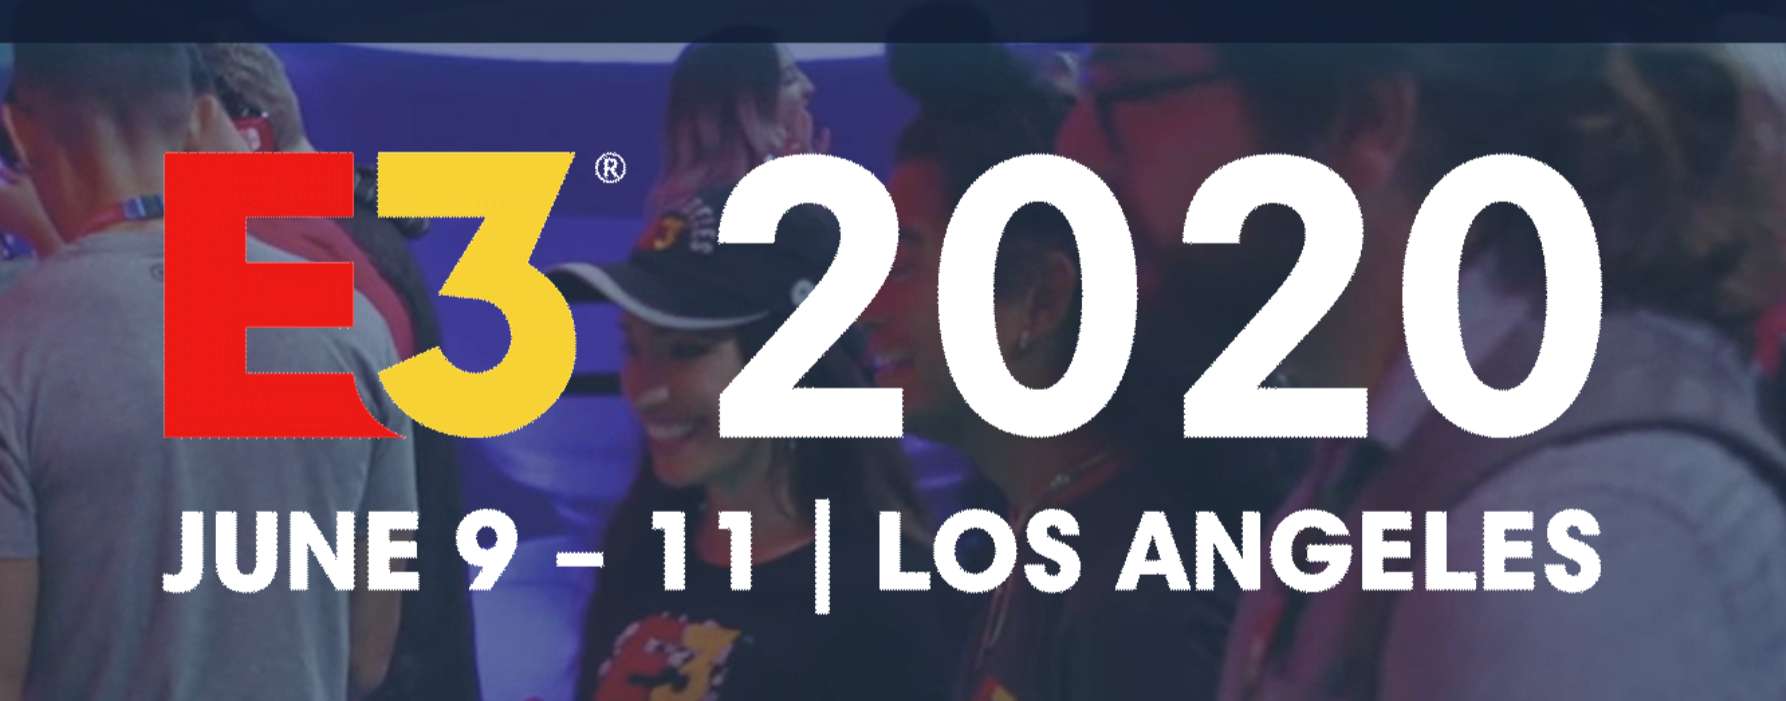 The ESA Have Confirmed That E3 2020 Will Not Be Held Online